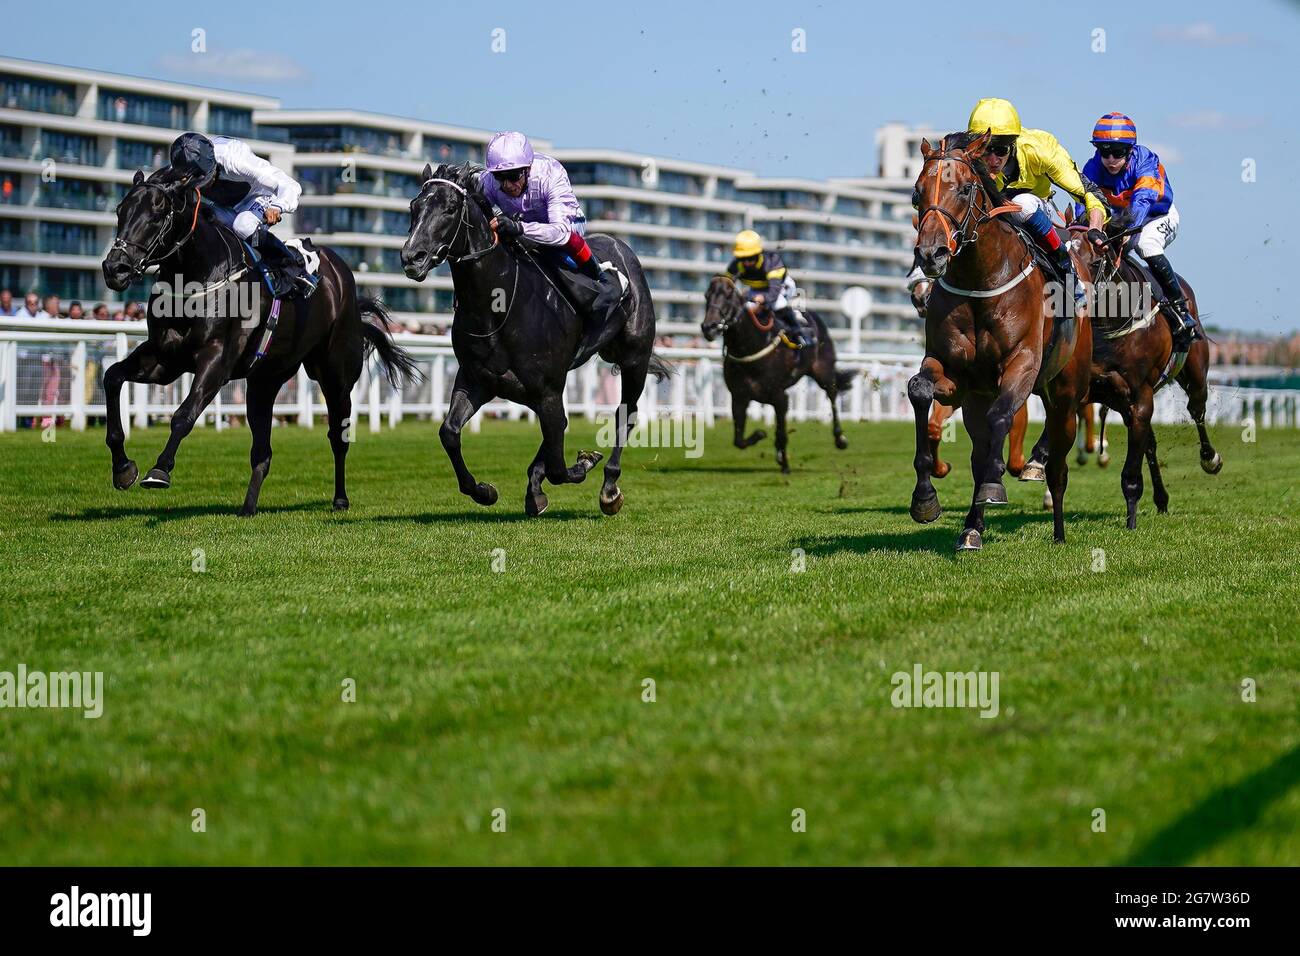 Adam Kirby riding Caturra (yellow) win The IRE Incentive, It Pays To Buy Irish Rose Bowl Stakes at Newbury Racecourse. Stock Photo